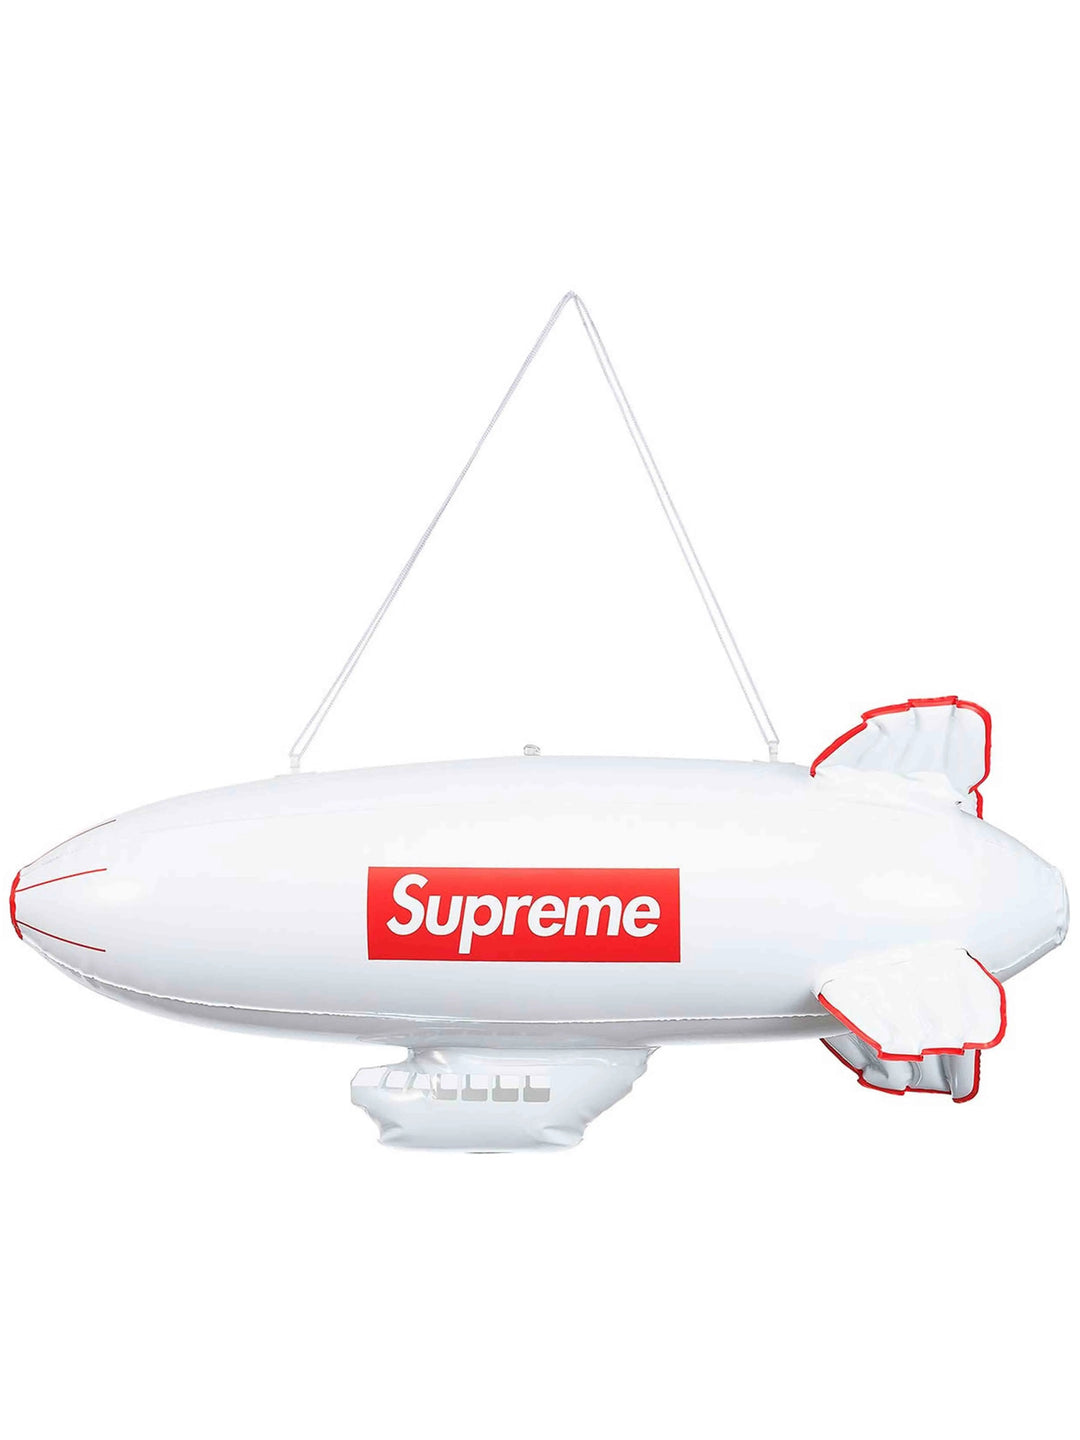 Supreme Inflatable Blimp White [FW17] [USED] Prior